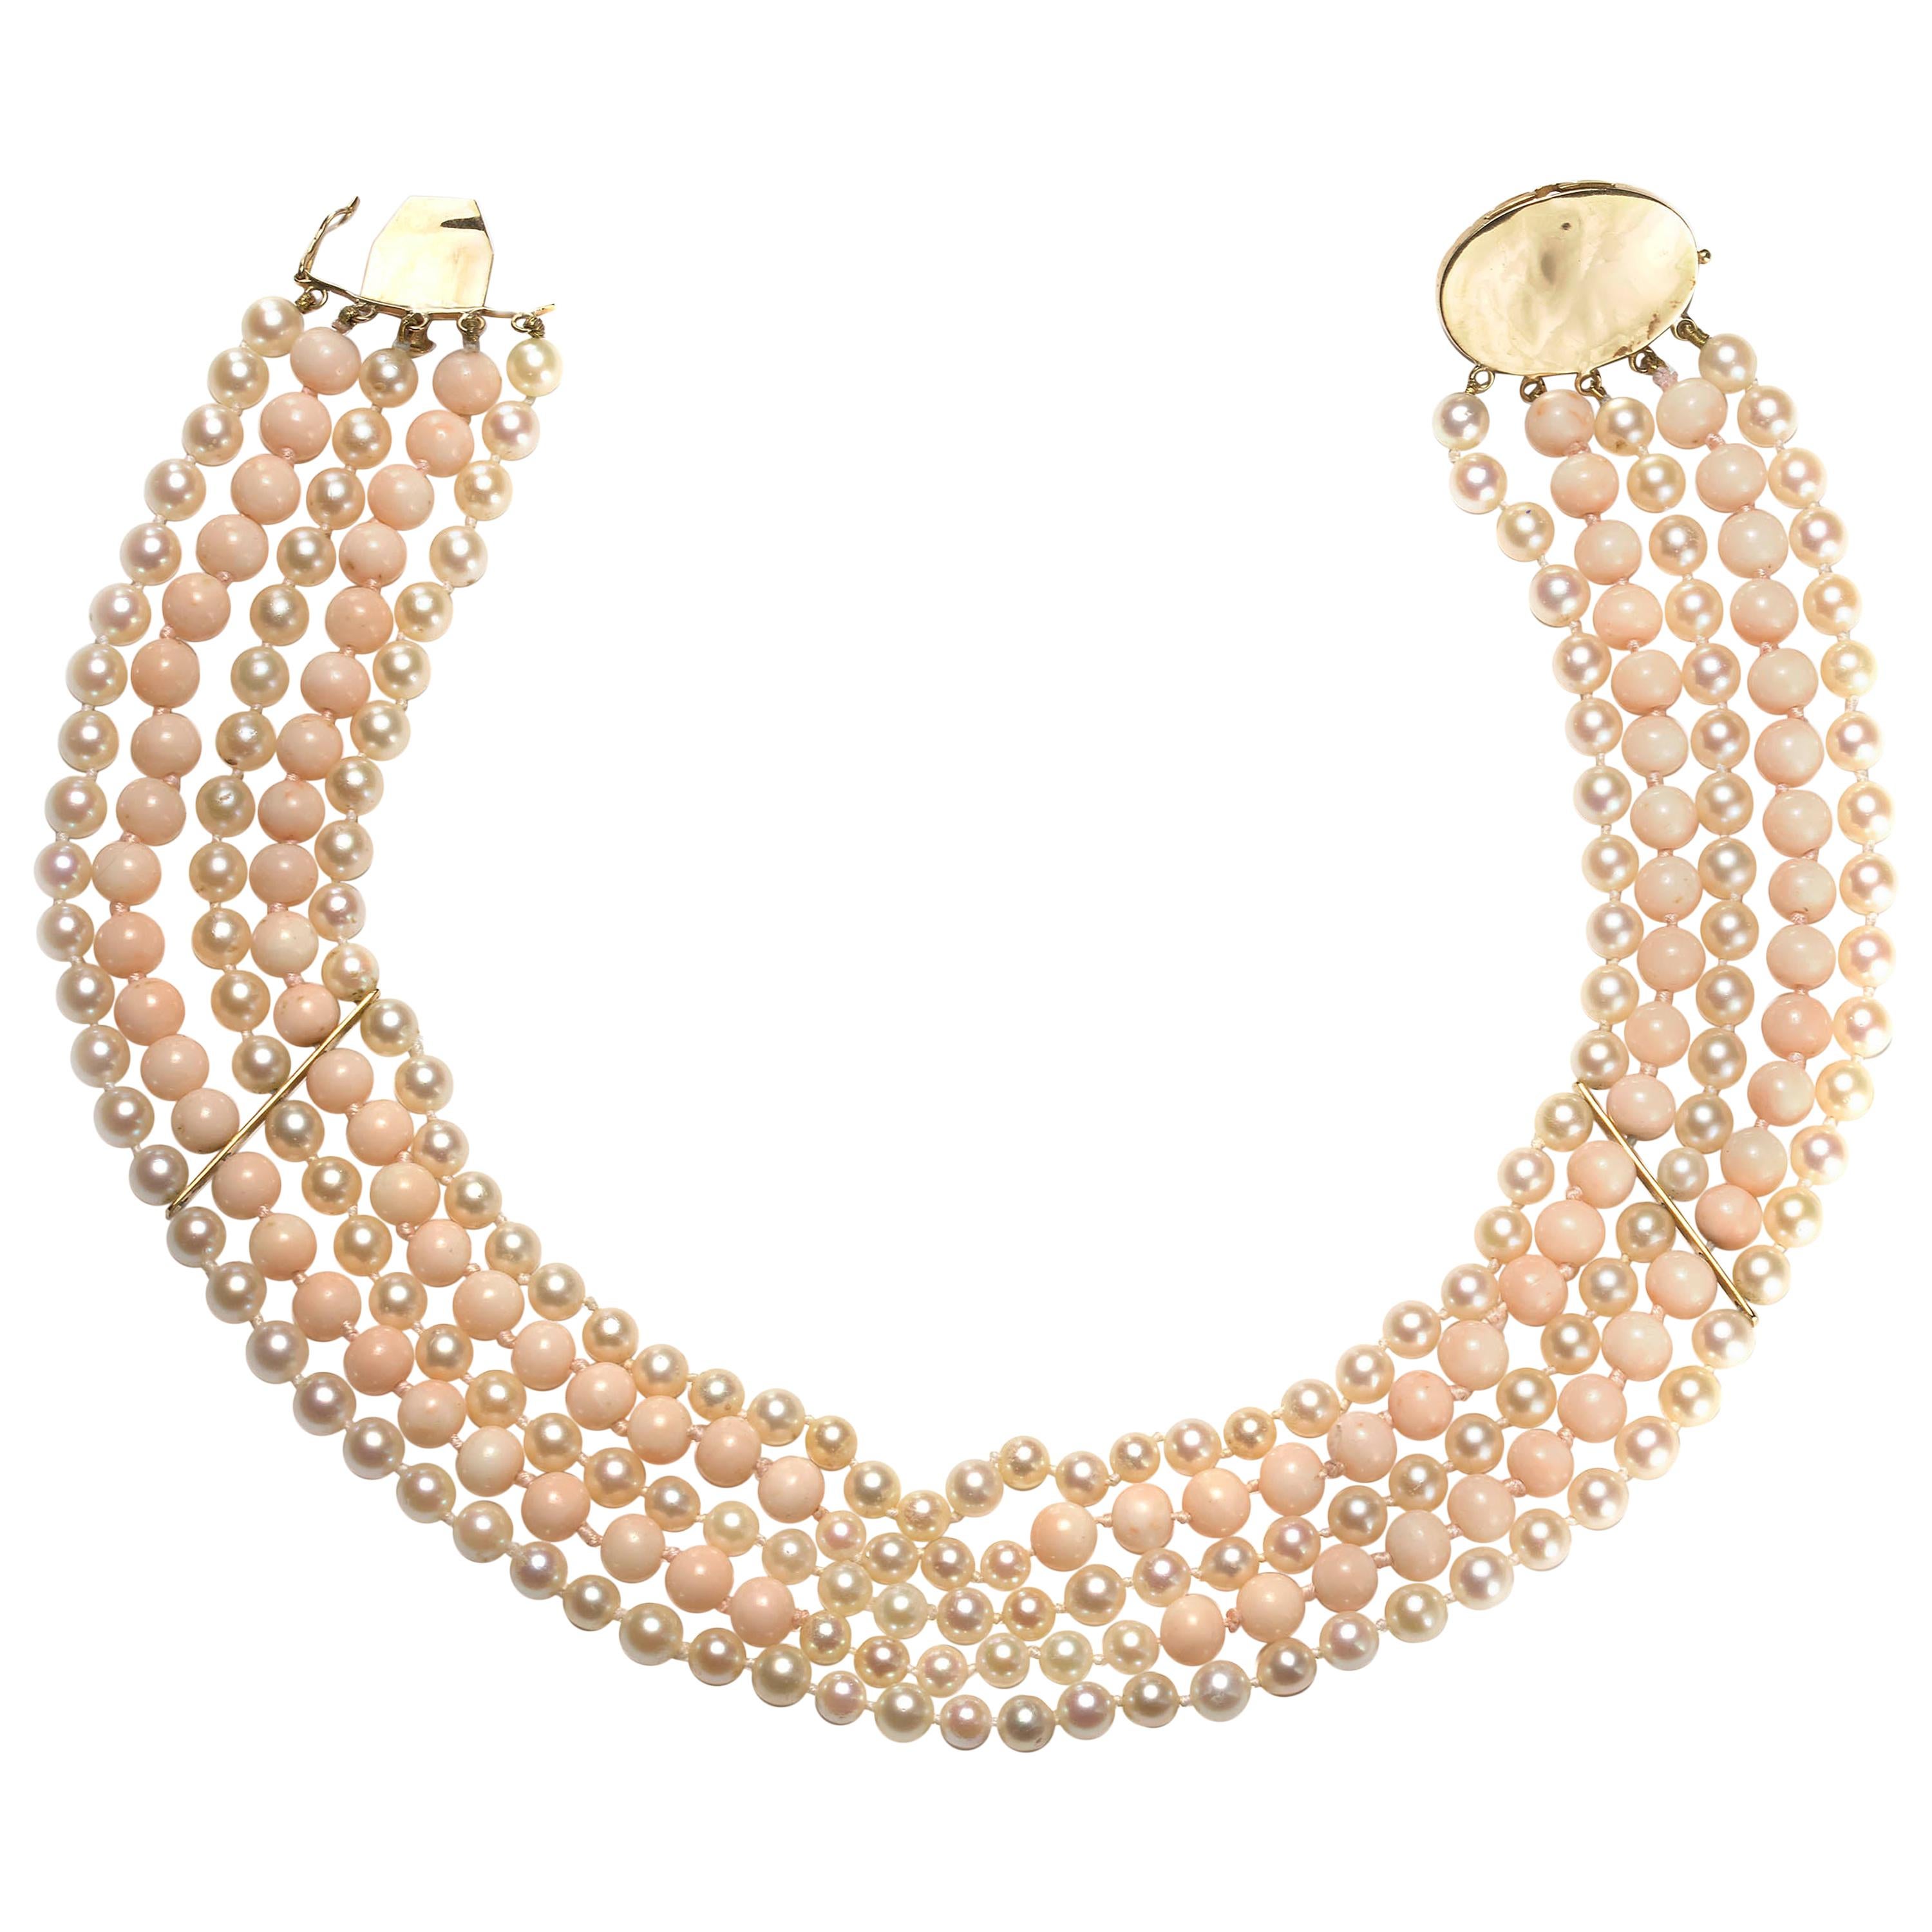 Contemporary Vintage Coral and Cultured Pearl Five Row Necklace, Circa 1970 For Sale